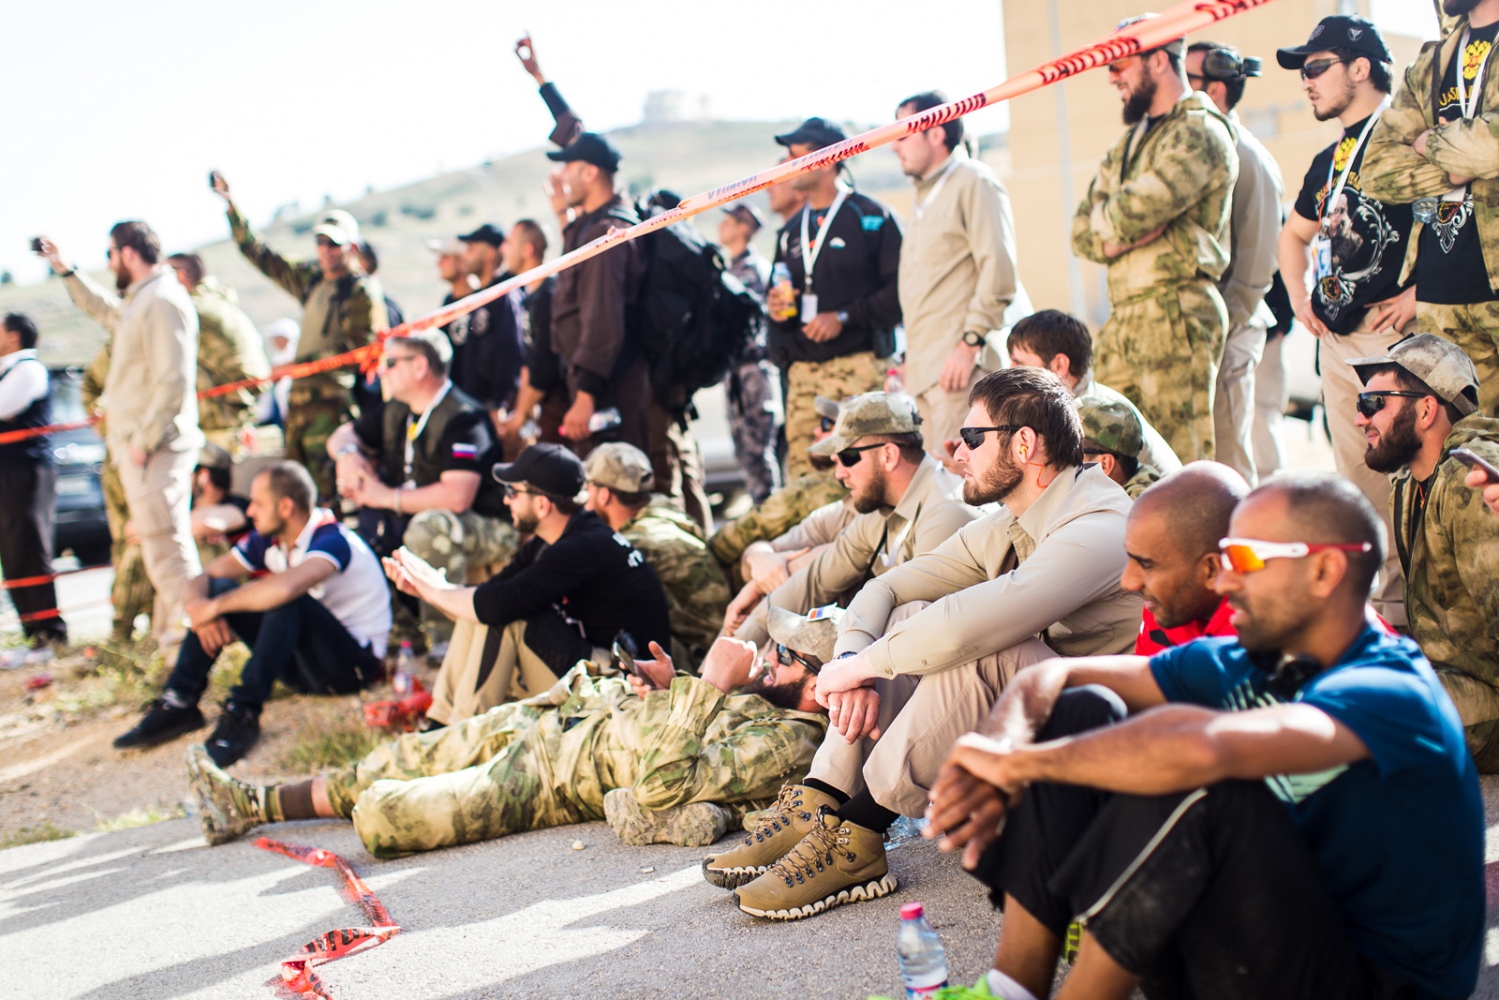  Teams from various countries relax together and cheer on their teammates during the first event of the Warrior Competition, "Top Gun." Elite counter-terrorism teams from around the world compete for the title of champion at the King Abdullah II Spec